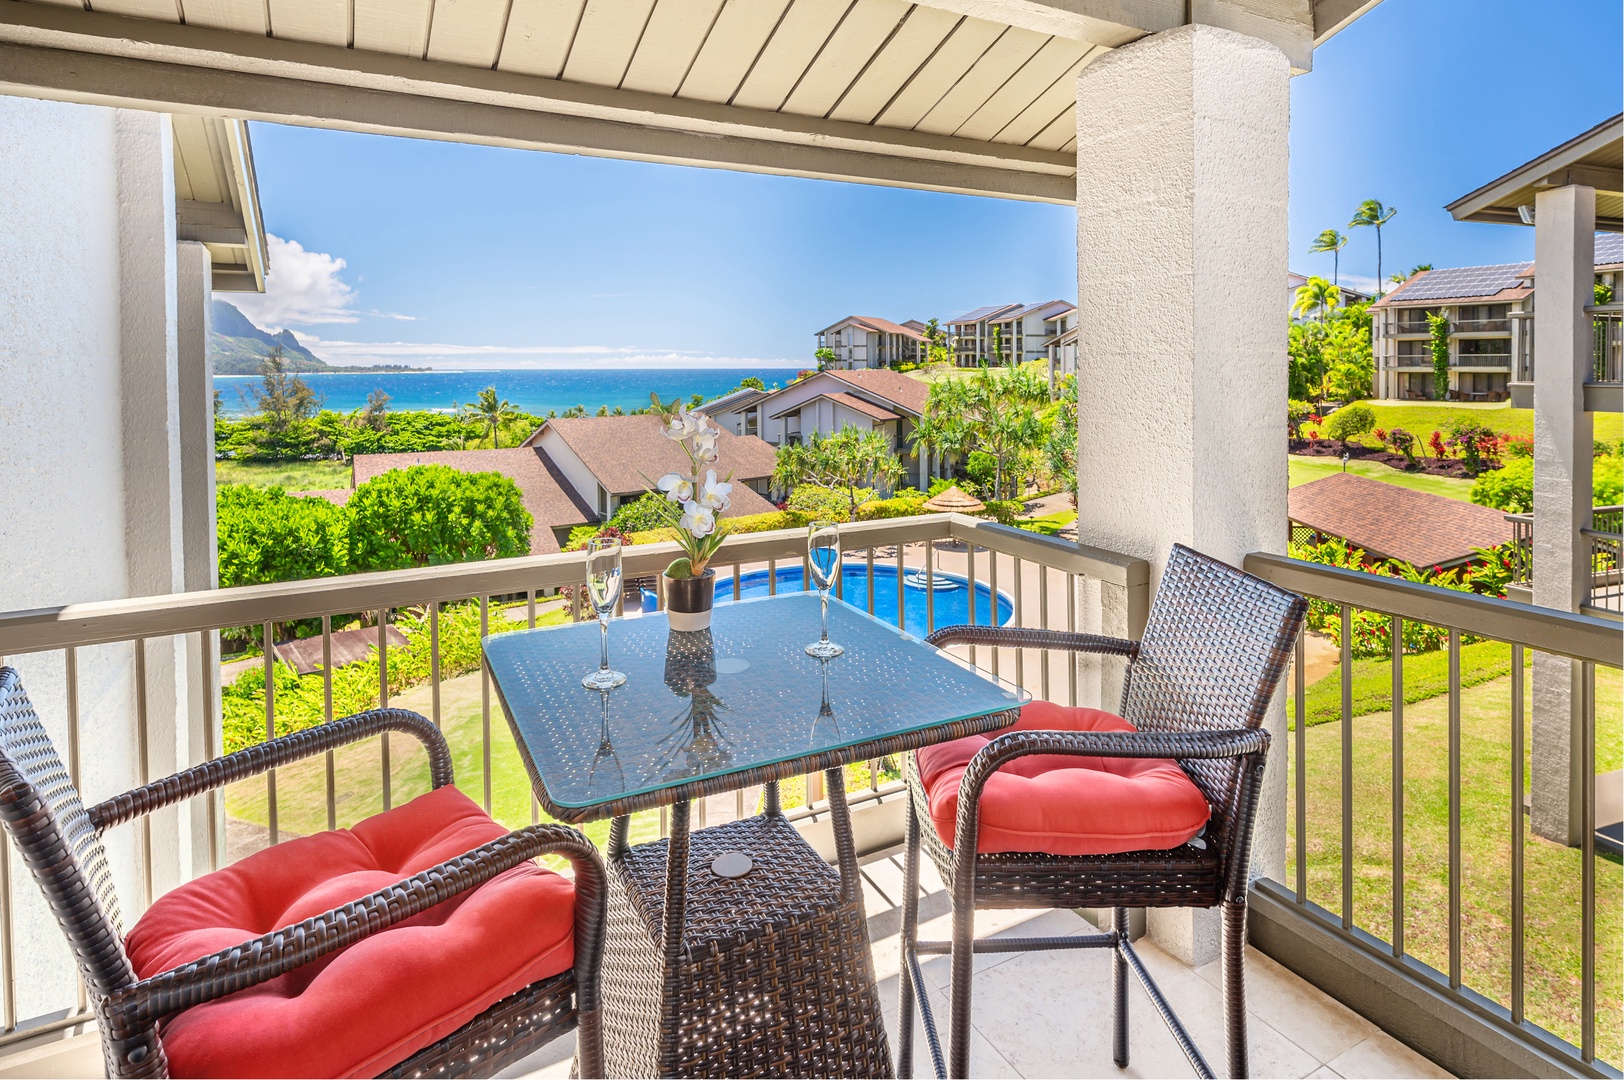 Princeville Vacation Rentals, Hanalei Bay Resort 7308 - Outdoor Dining for two